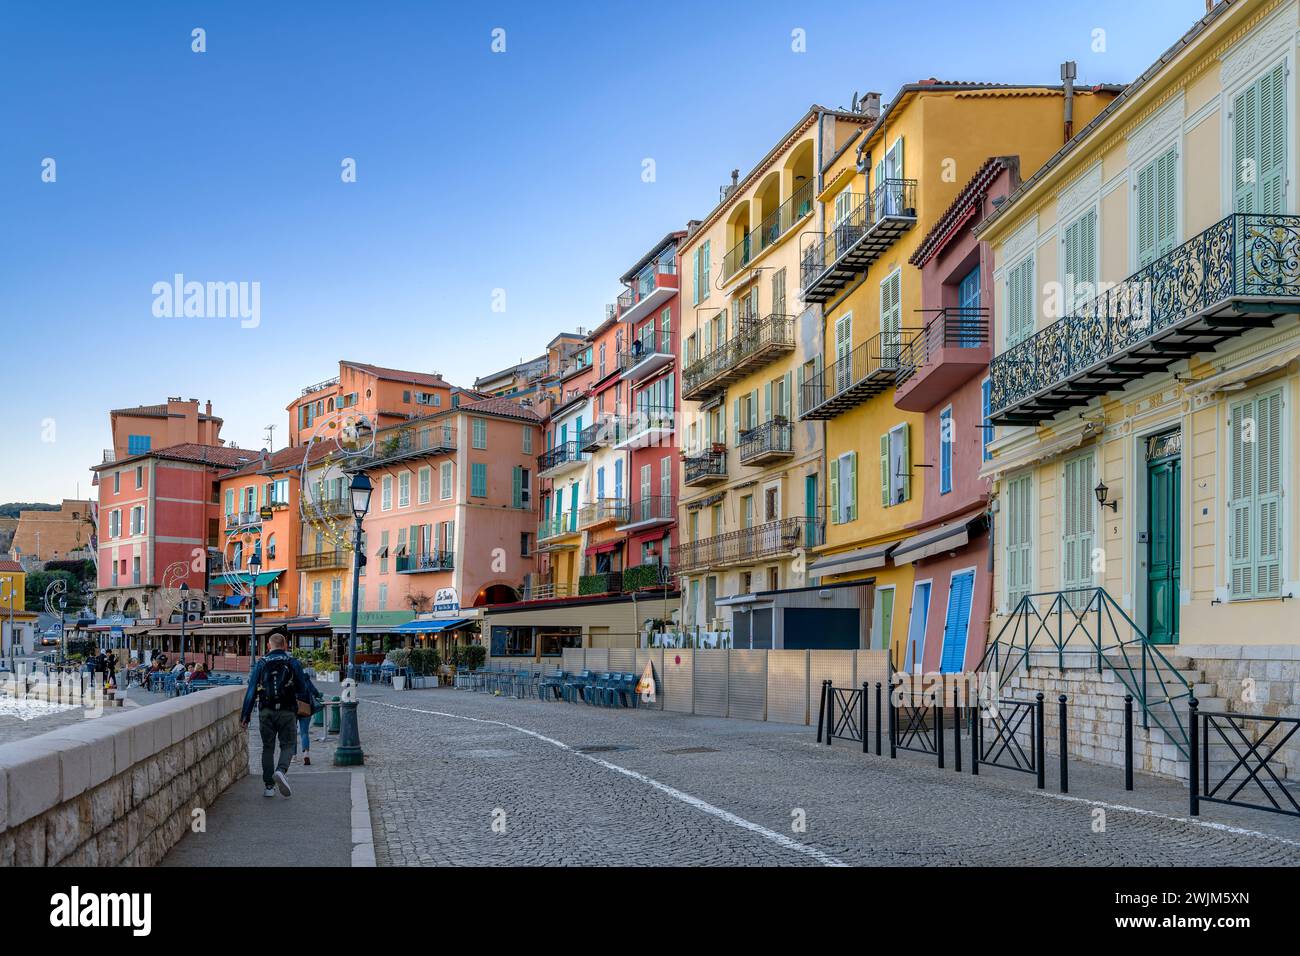 Evening in beautiful Villefranche-sur-Mer on the French Riviera - Côte d'Azur, France. Picture perfect, multicoloured, houses built close to the sea. Stock Photo